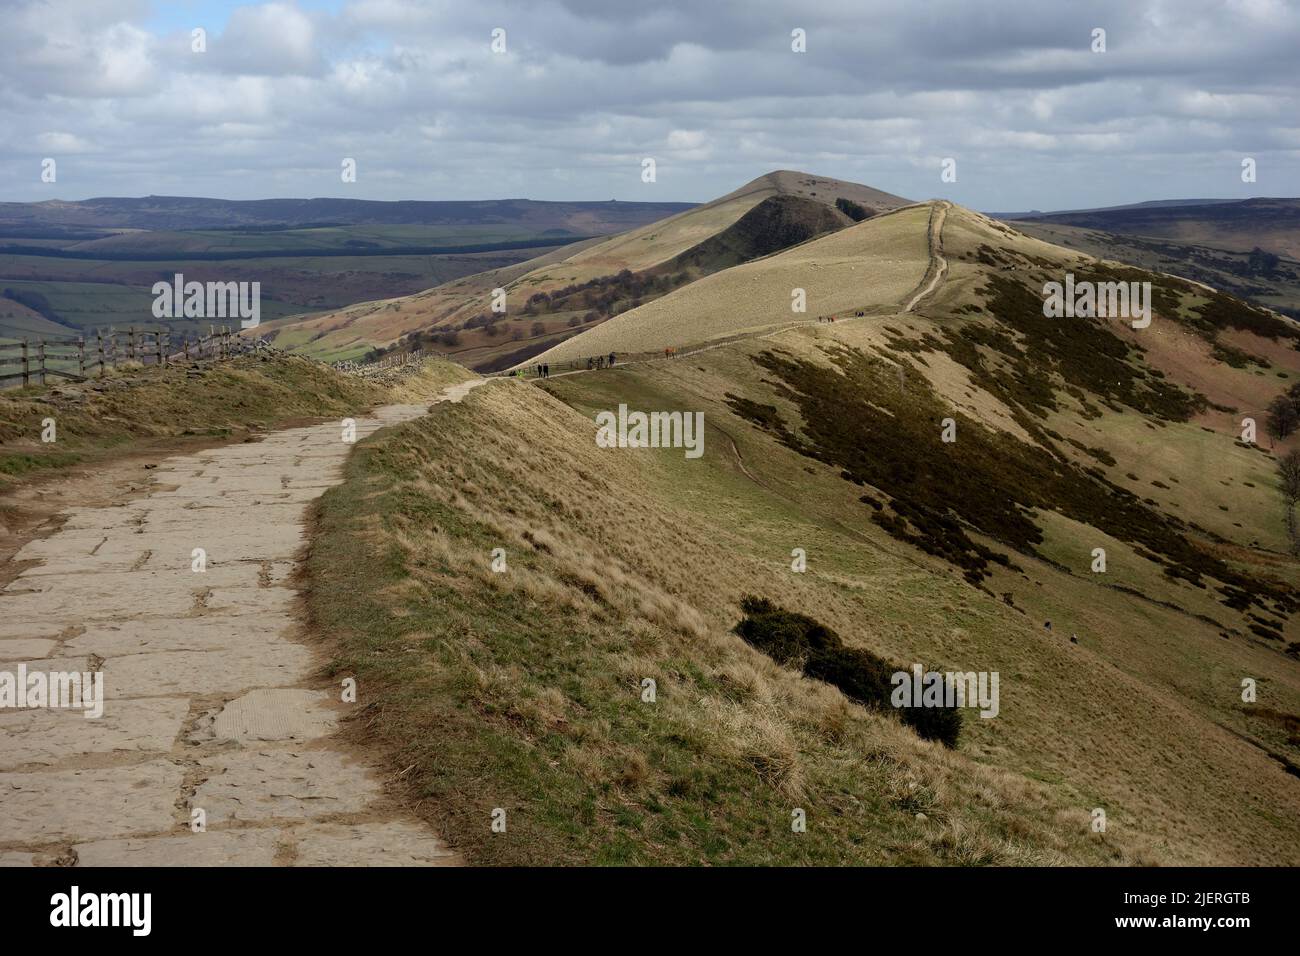 The Ridge Path to Hollins Cross Leading to the Distant 'Mam Tor' in Edale, Derbyshire, Peak District National Park, England. Stock Photo